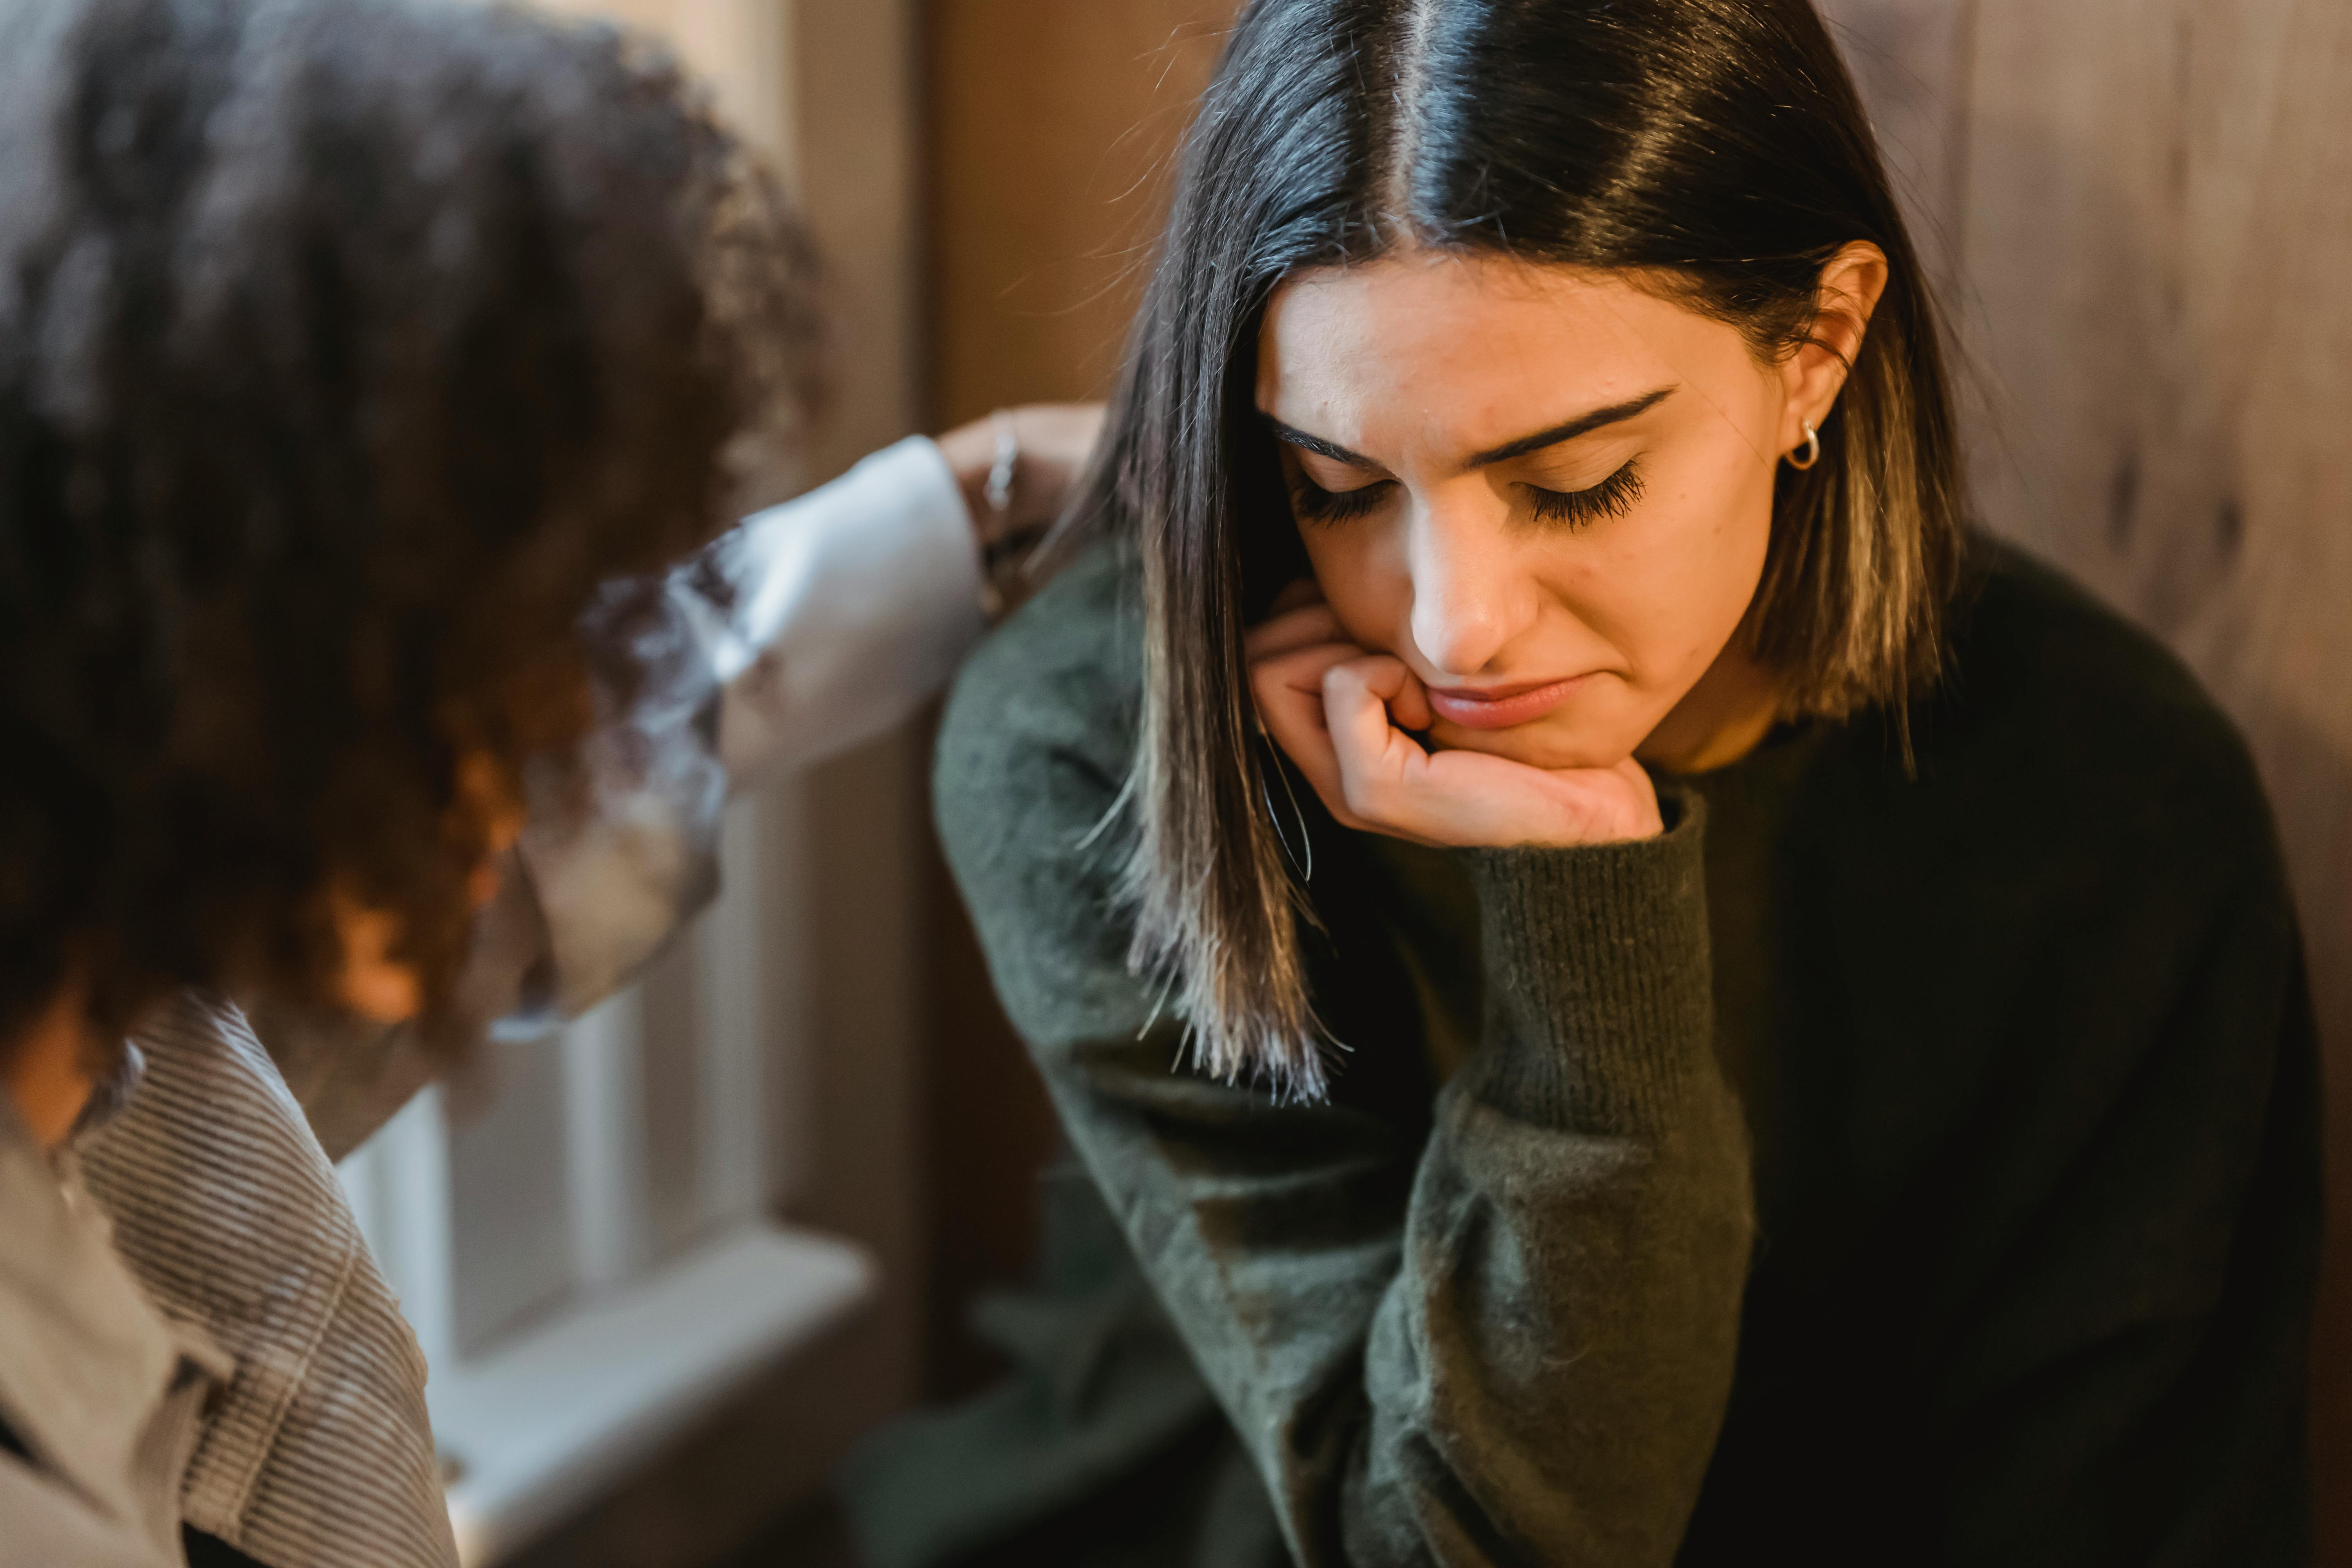 A woman consoling her sad friend | Source: Pexels